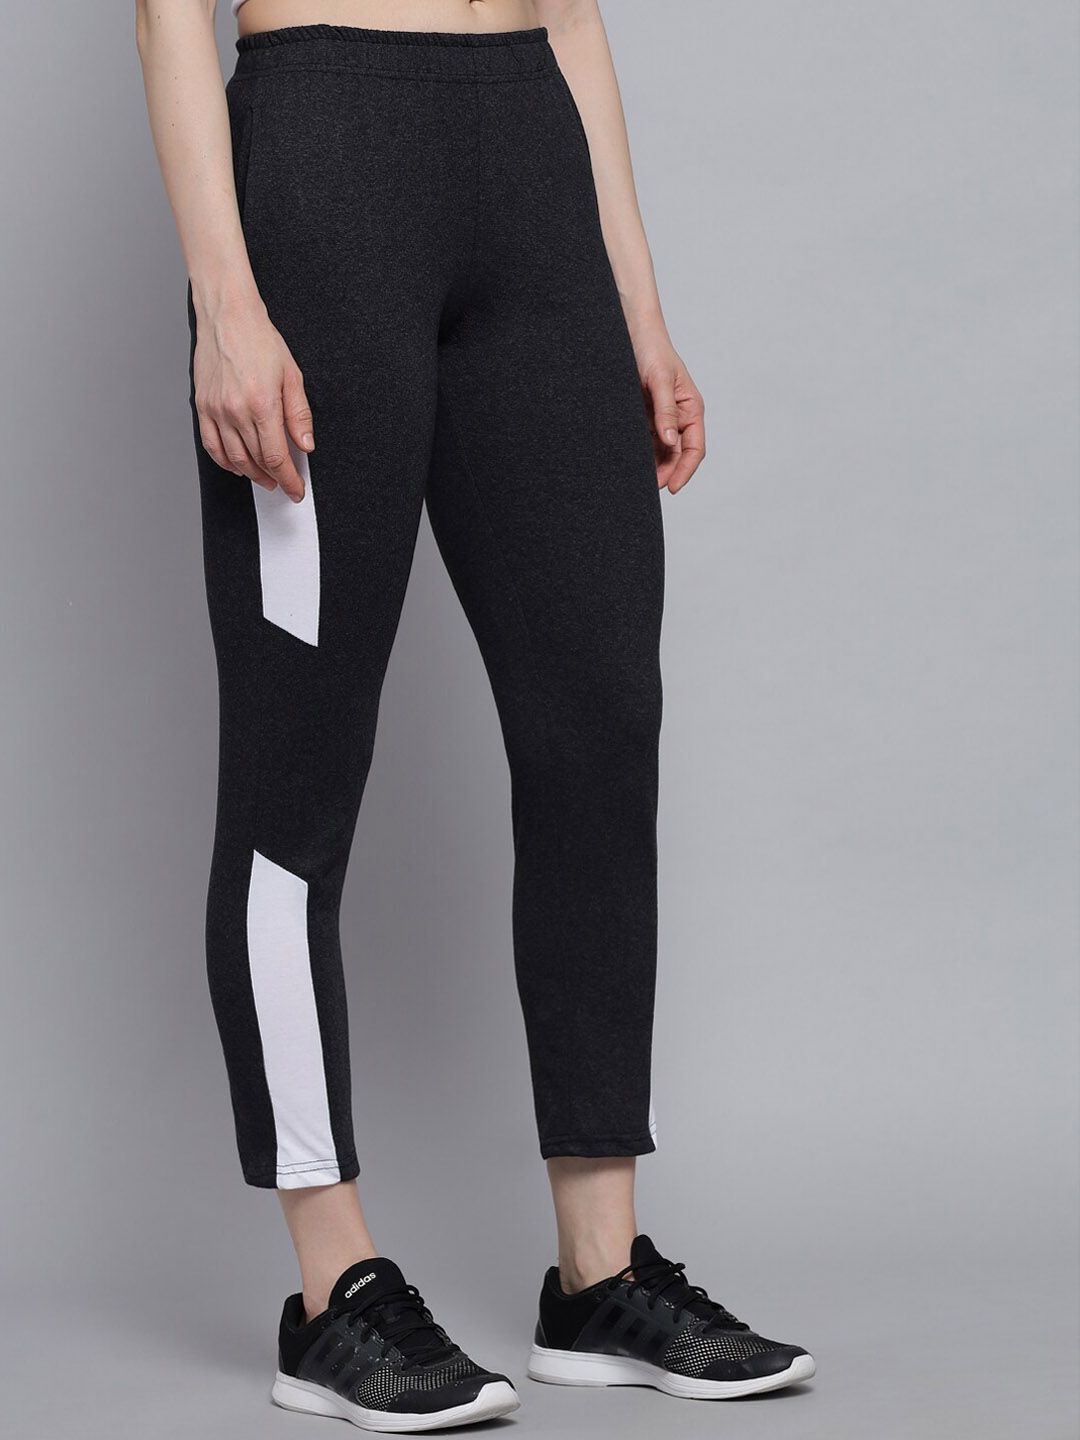 Q-rious Women Black Colourblocked Pure Cotton Ankle Length Track Pants Price in India